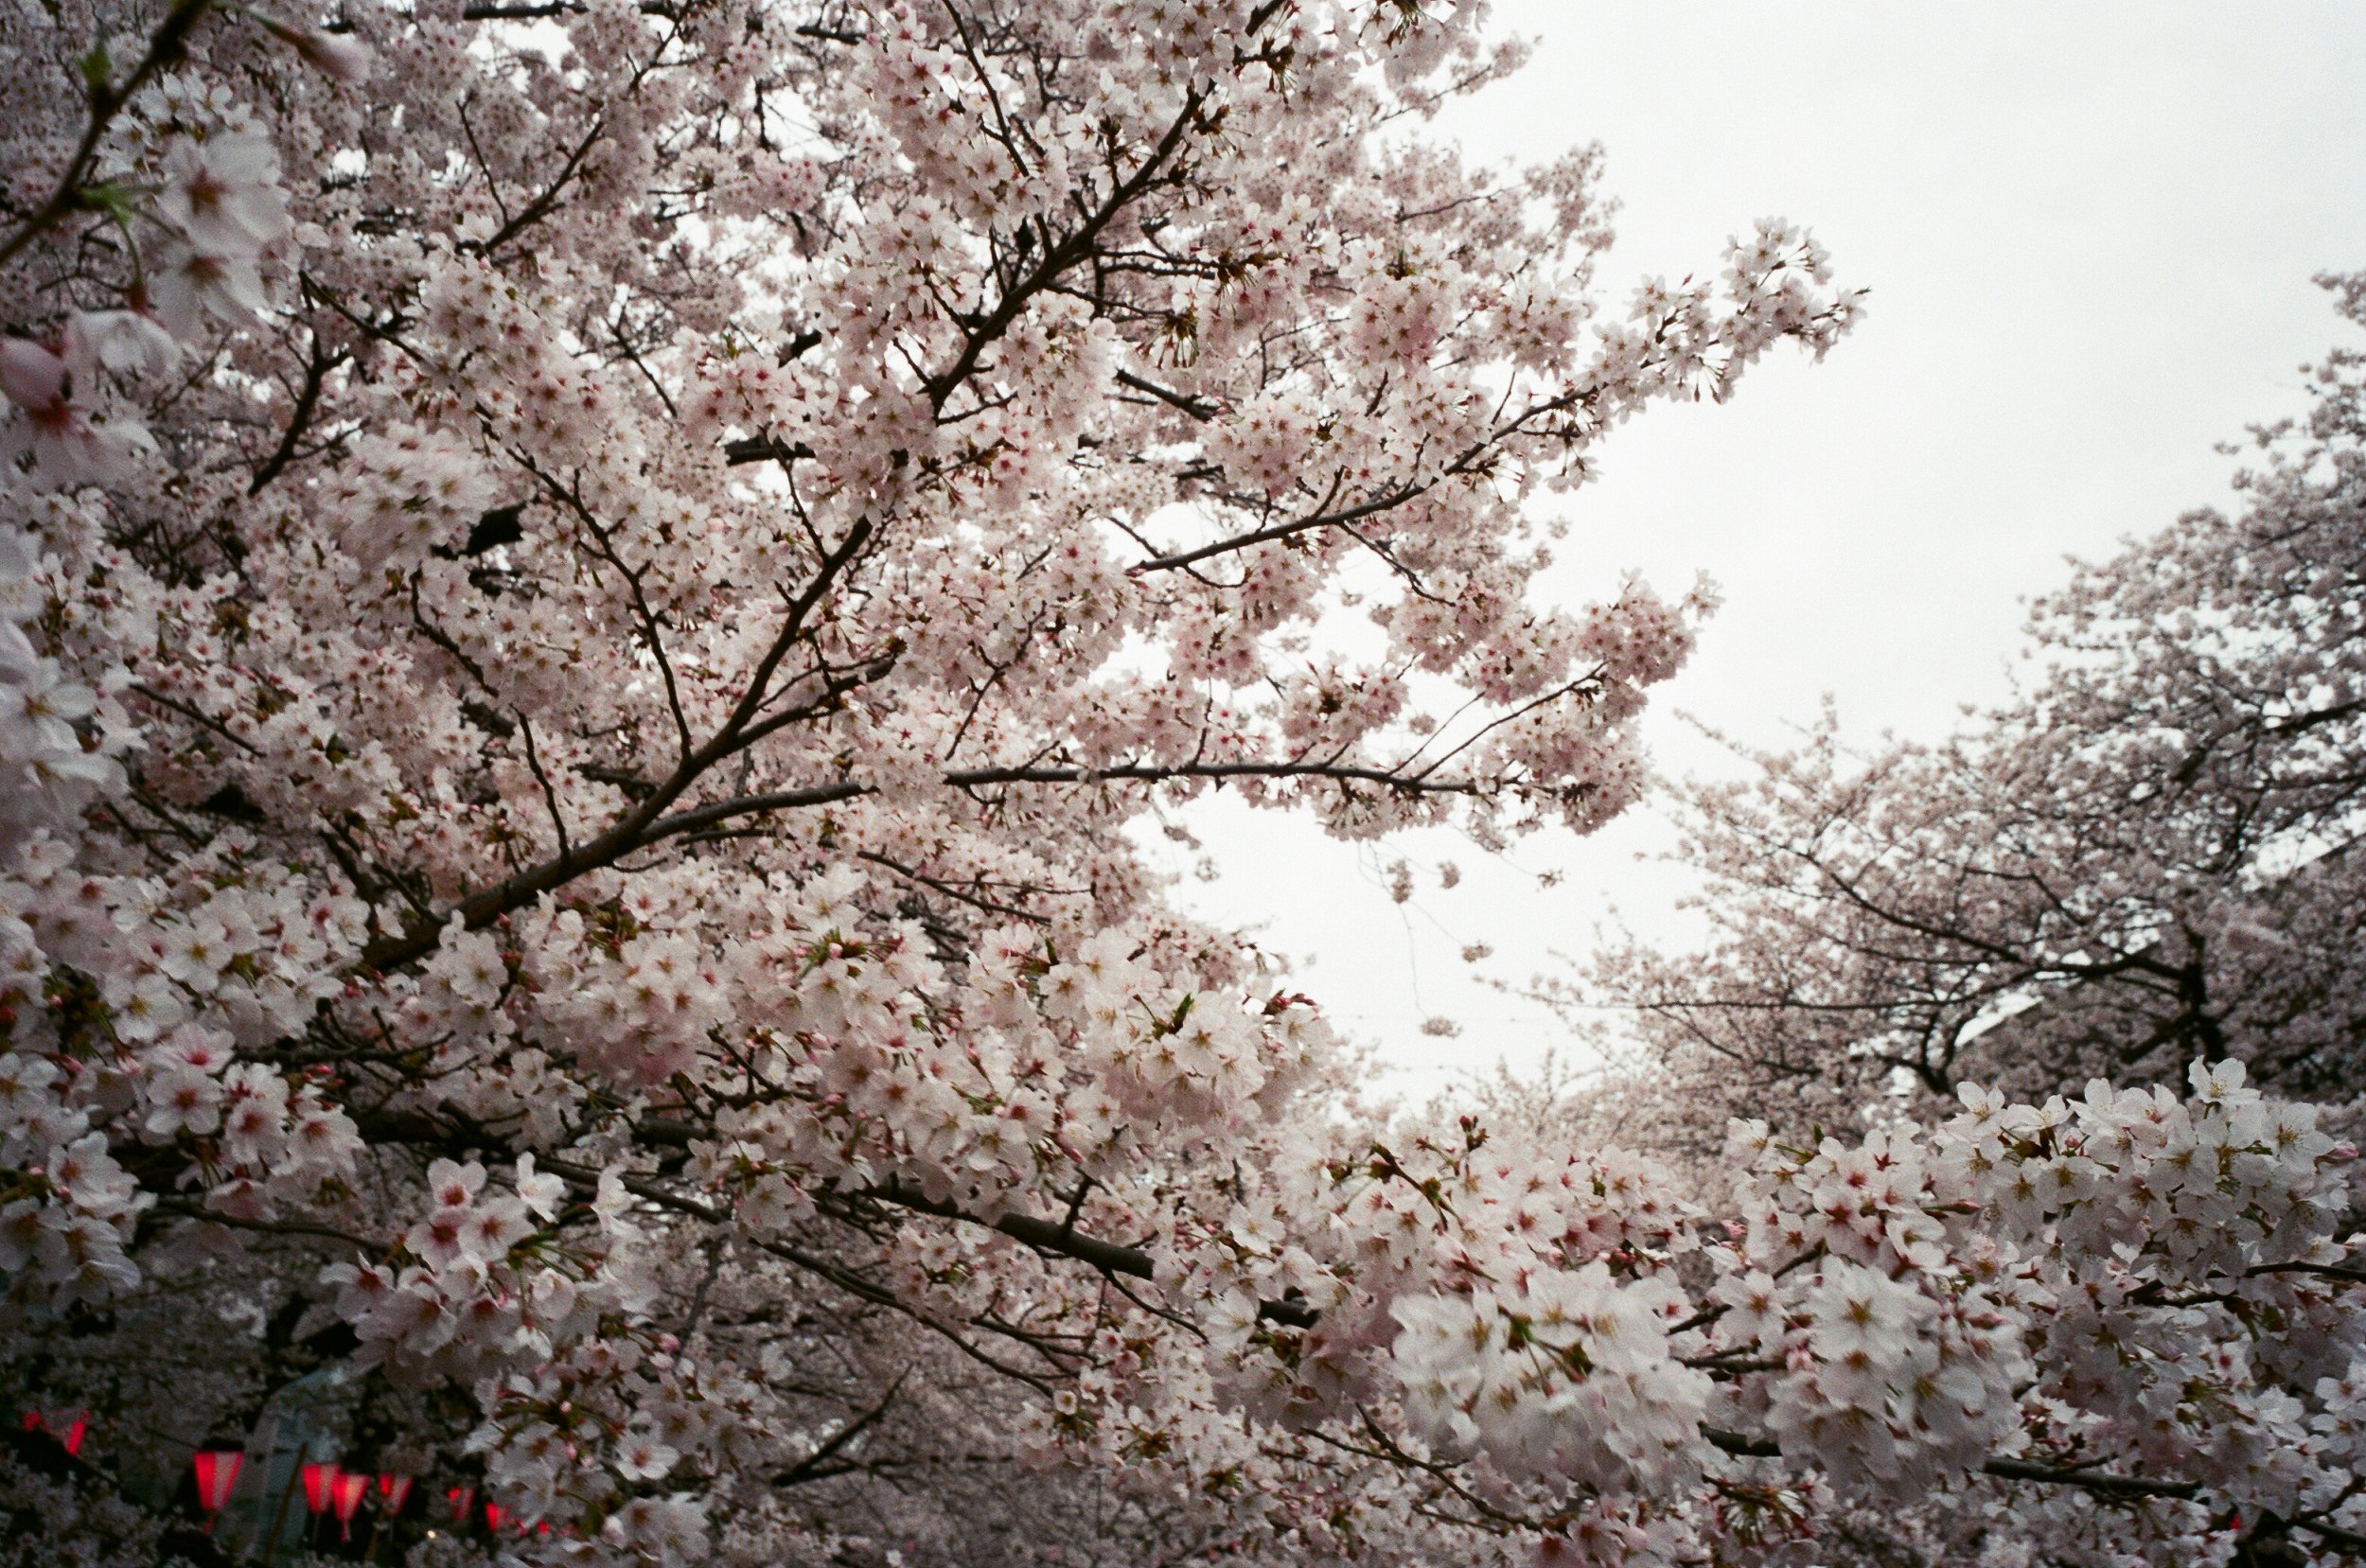 Photos of Japan's cherry blossoms turning from white to pink | Metro ...